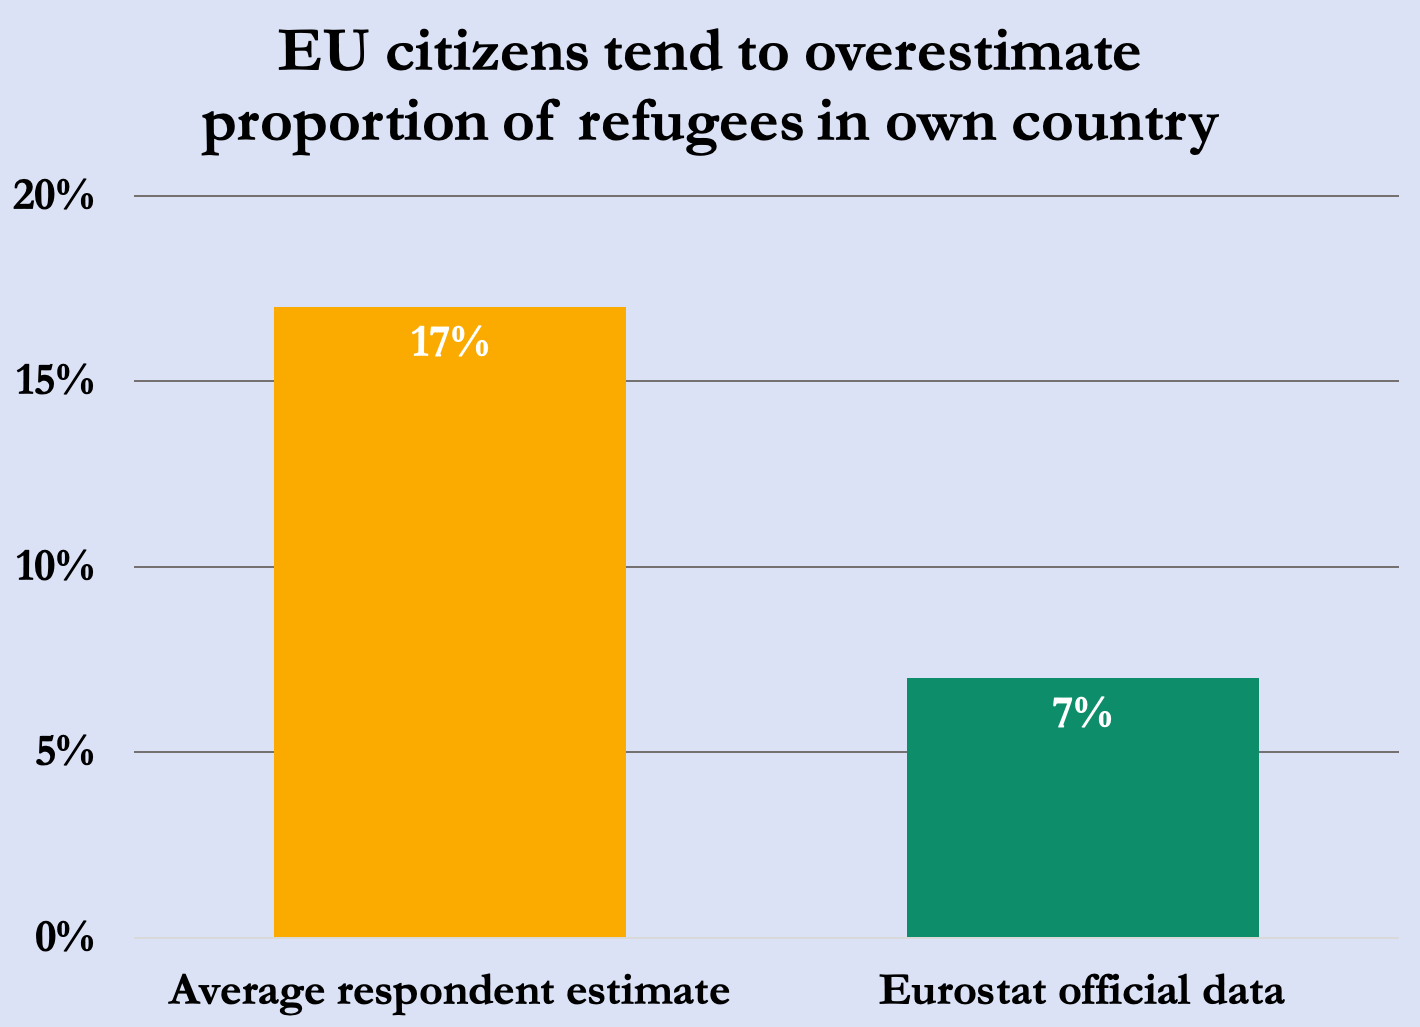 Overestimations of refugee levels by the EU citizens